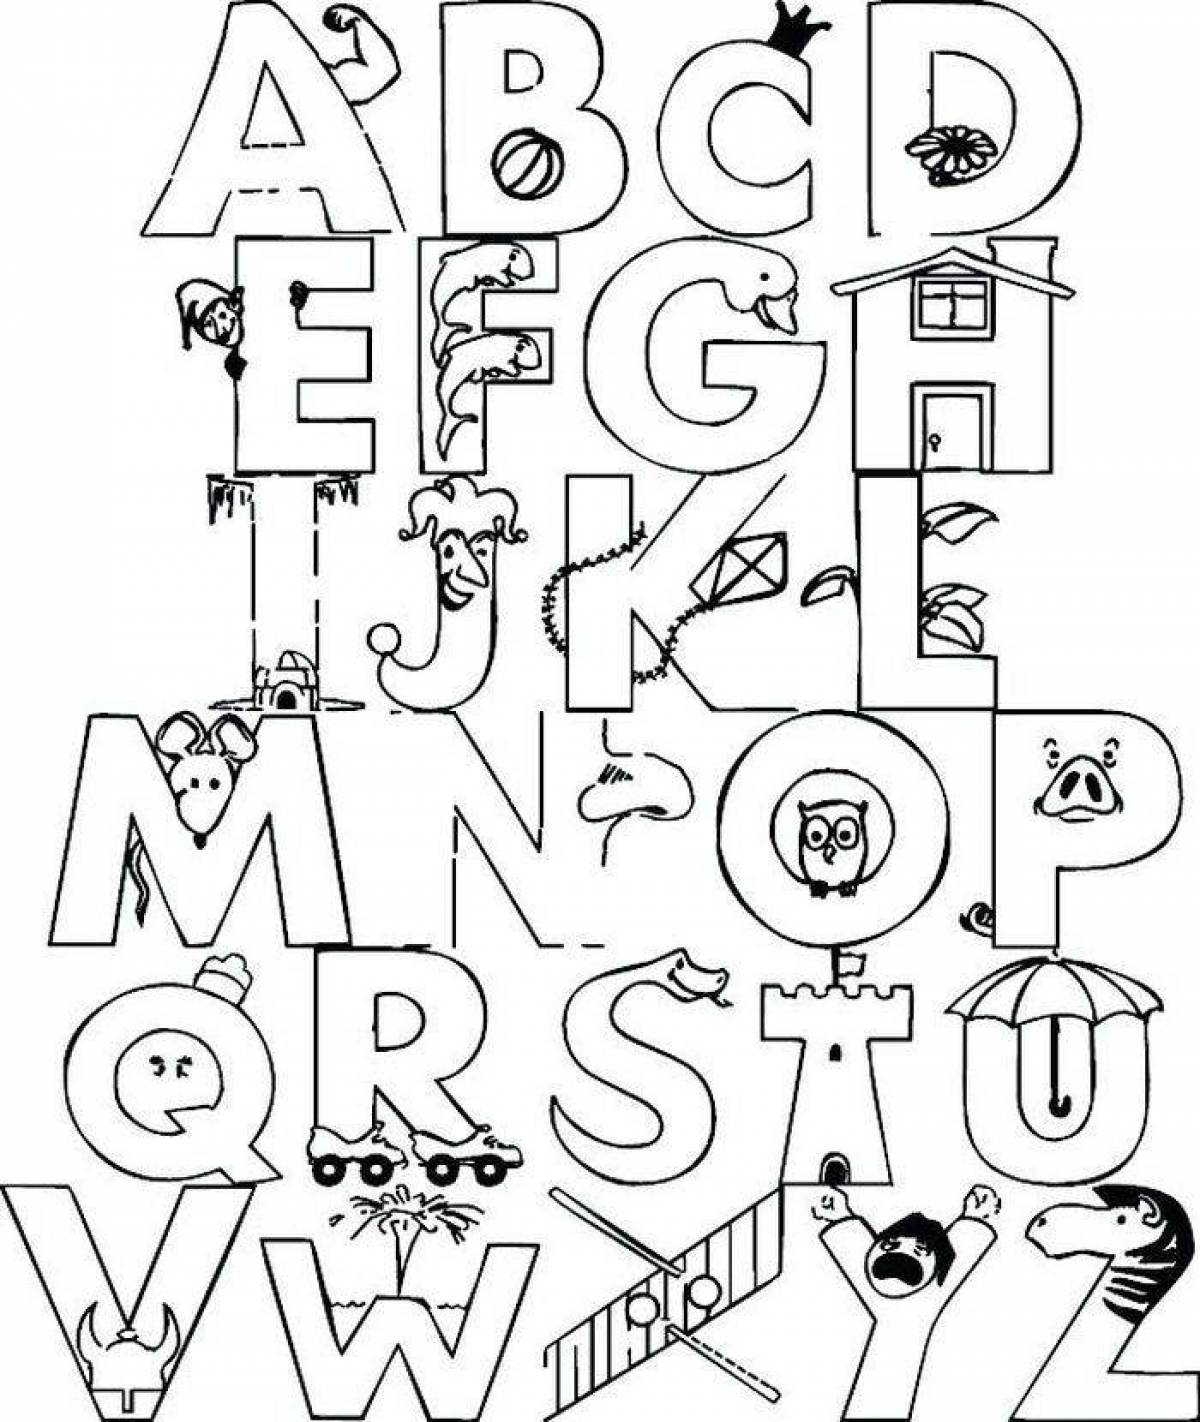 Colorful and adorable alphabet coloring page